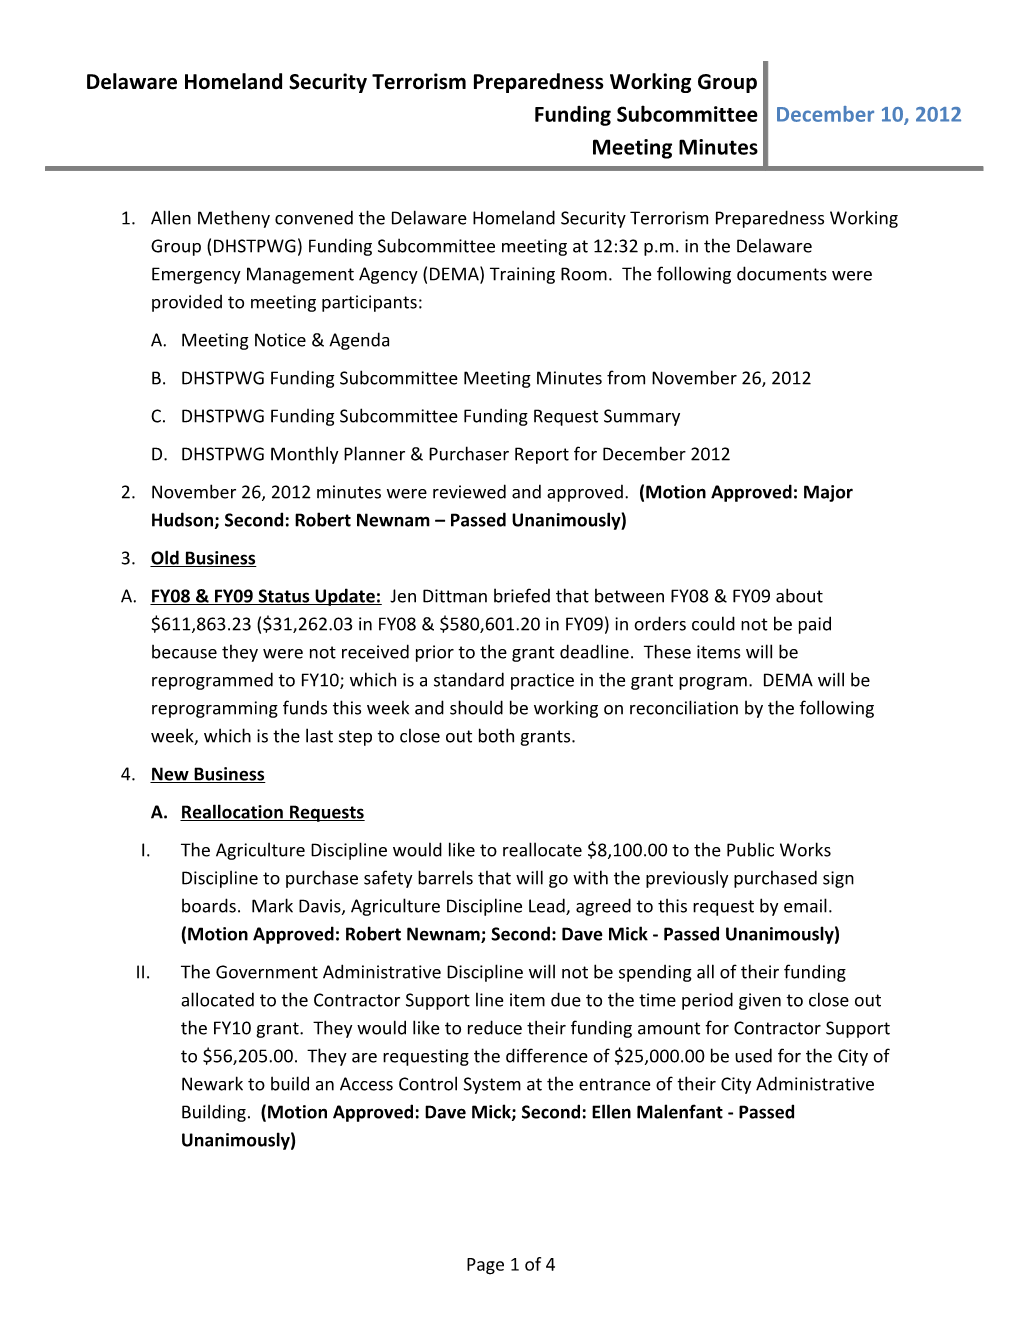 DHSTPWG Funding Subcommittee Funding Request Summary